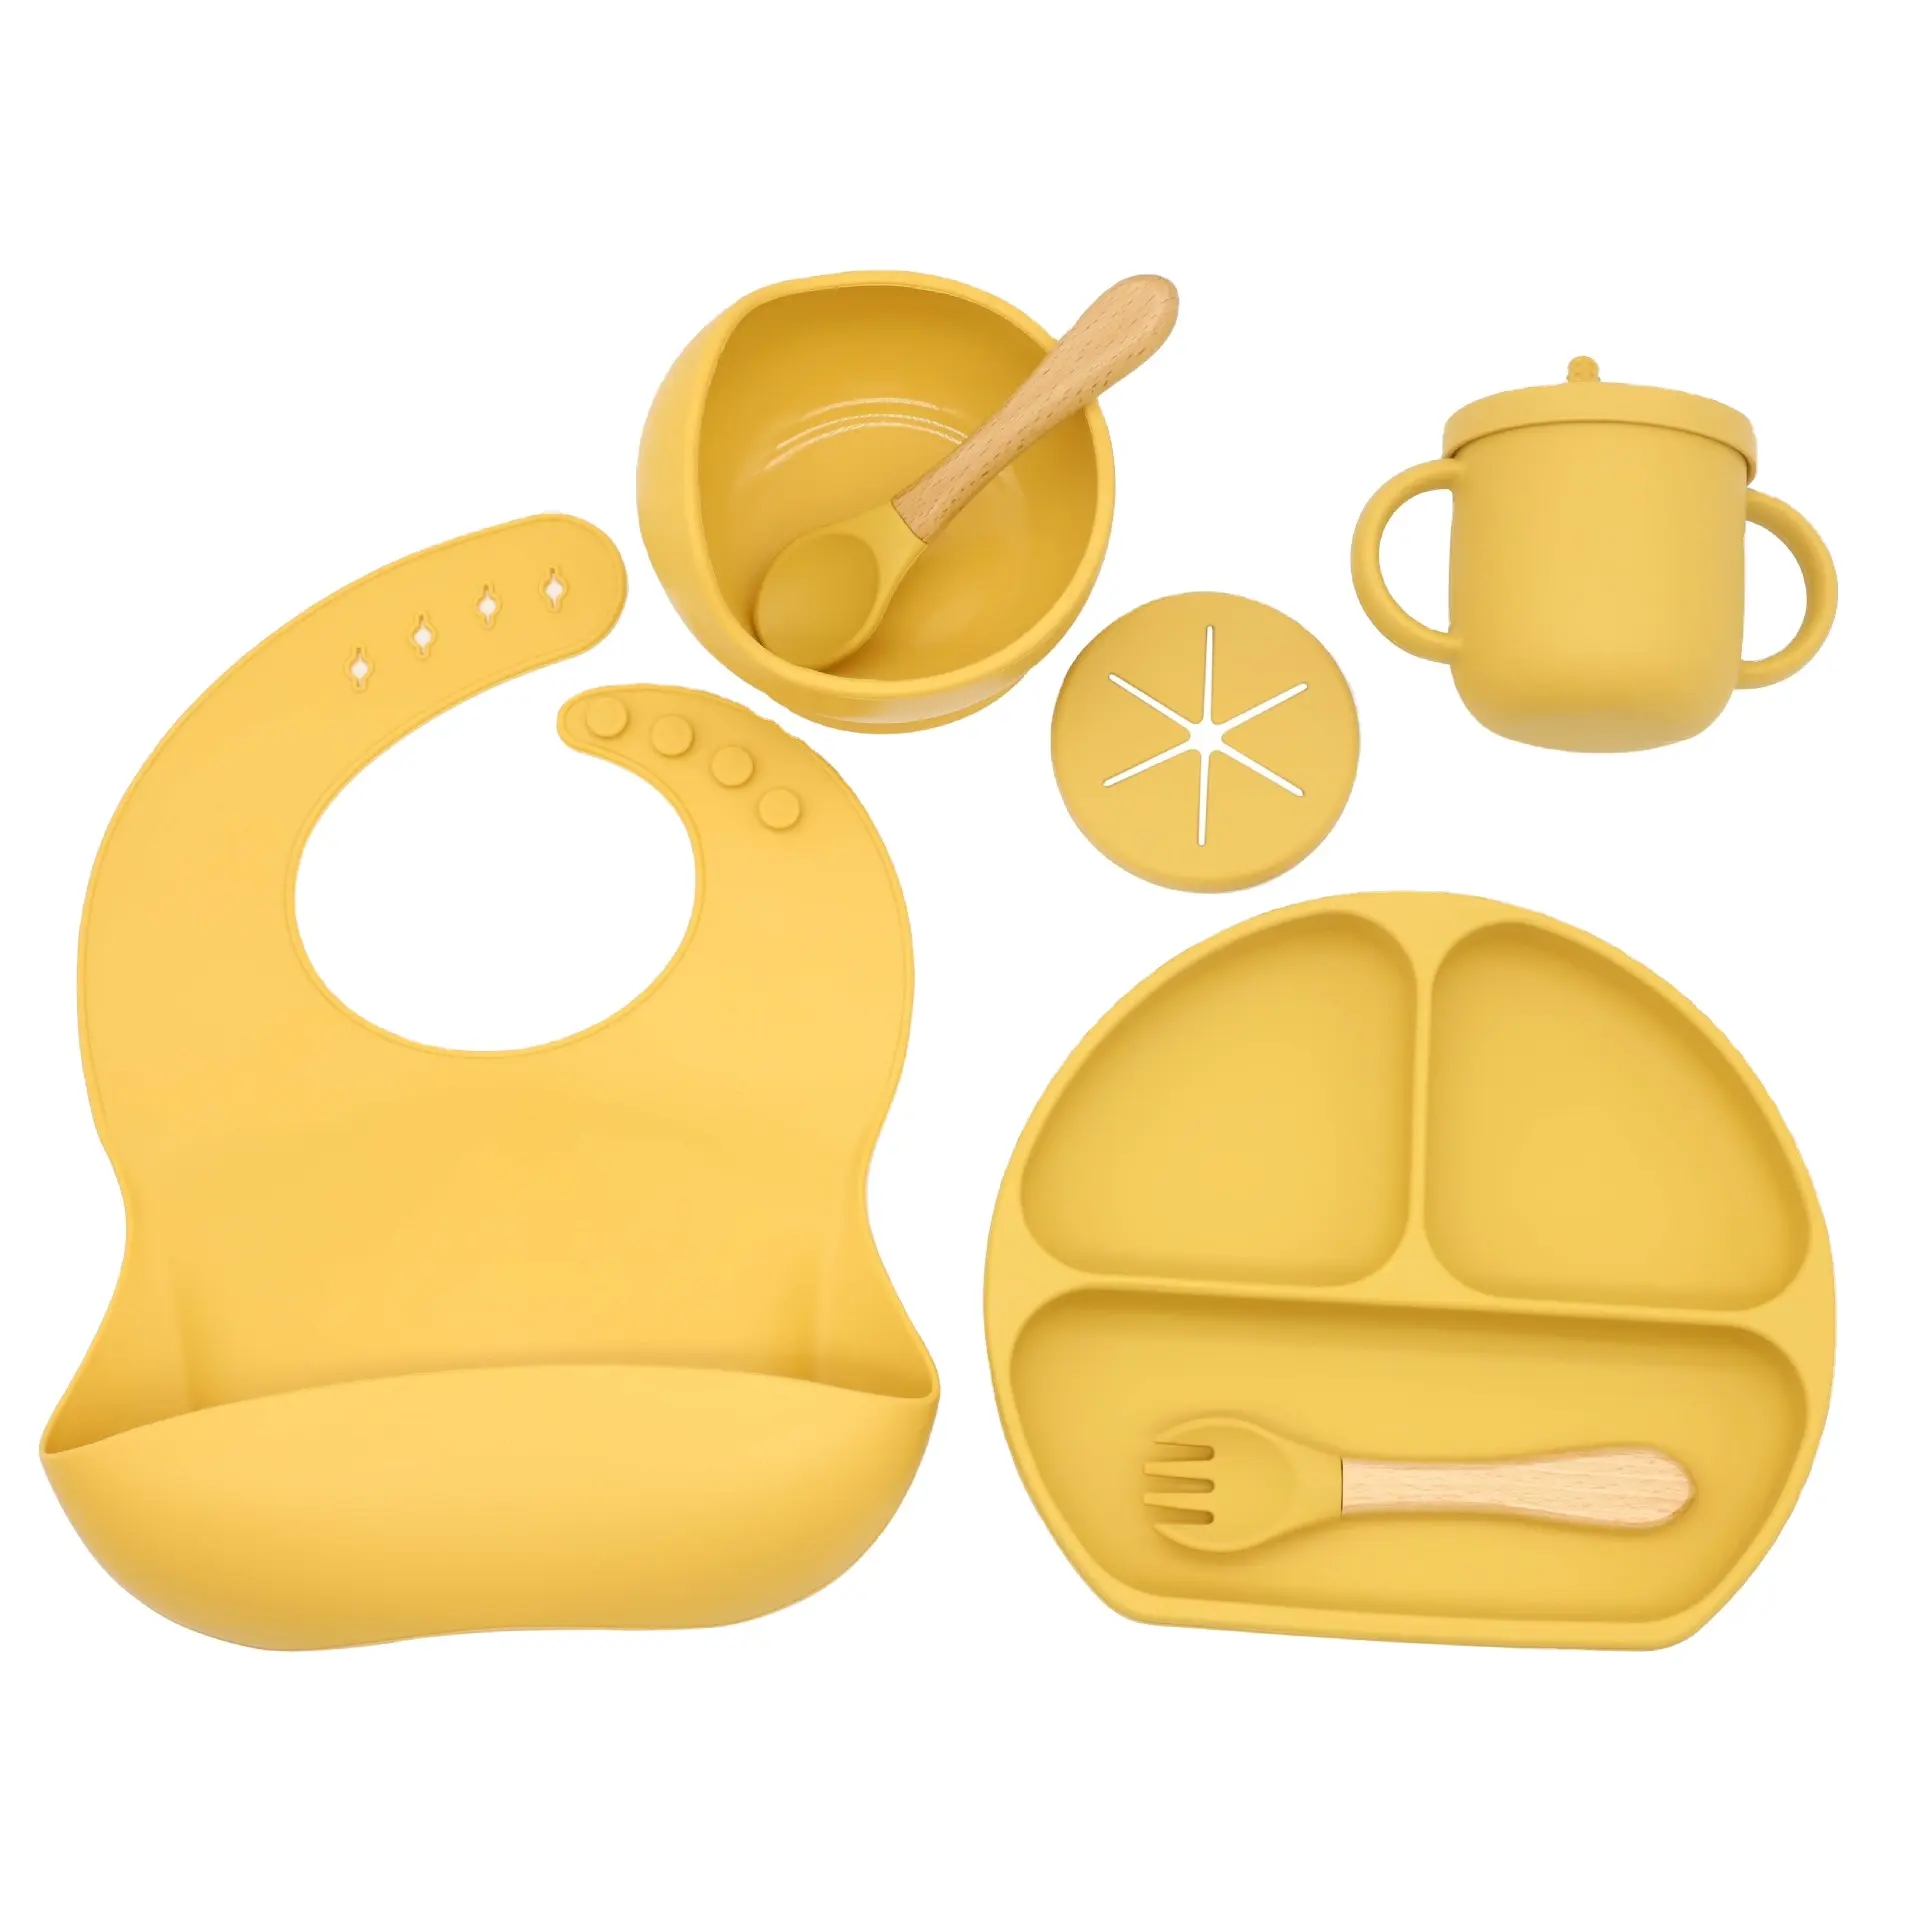 Food Safe Fashion Baby Toddler Kids Feeding Plate Set Silicone Bib Mold Plates Bowls Spoons Eating Utensils For Toddler